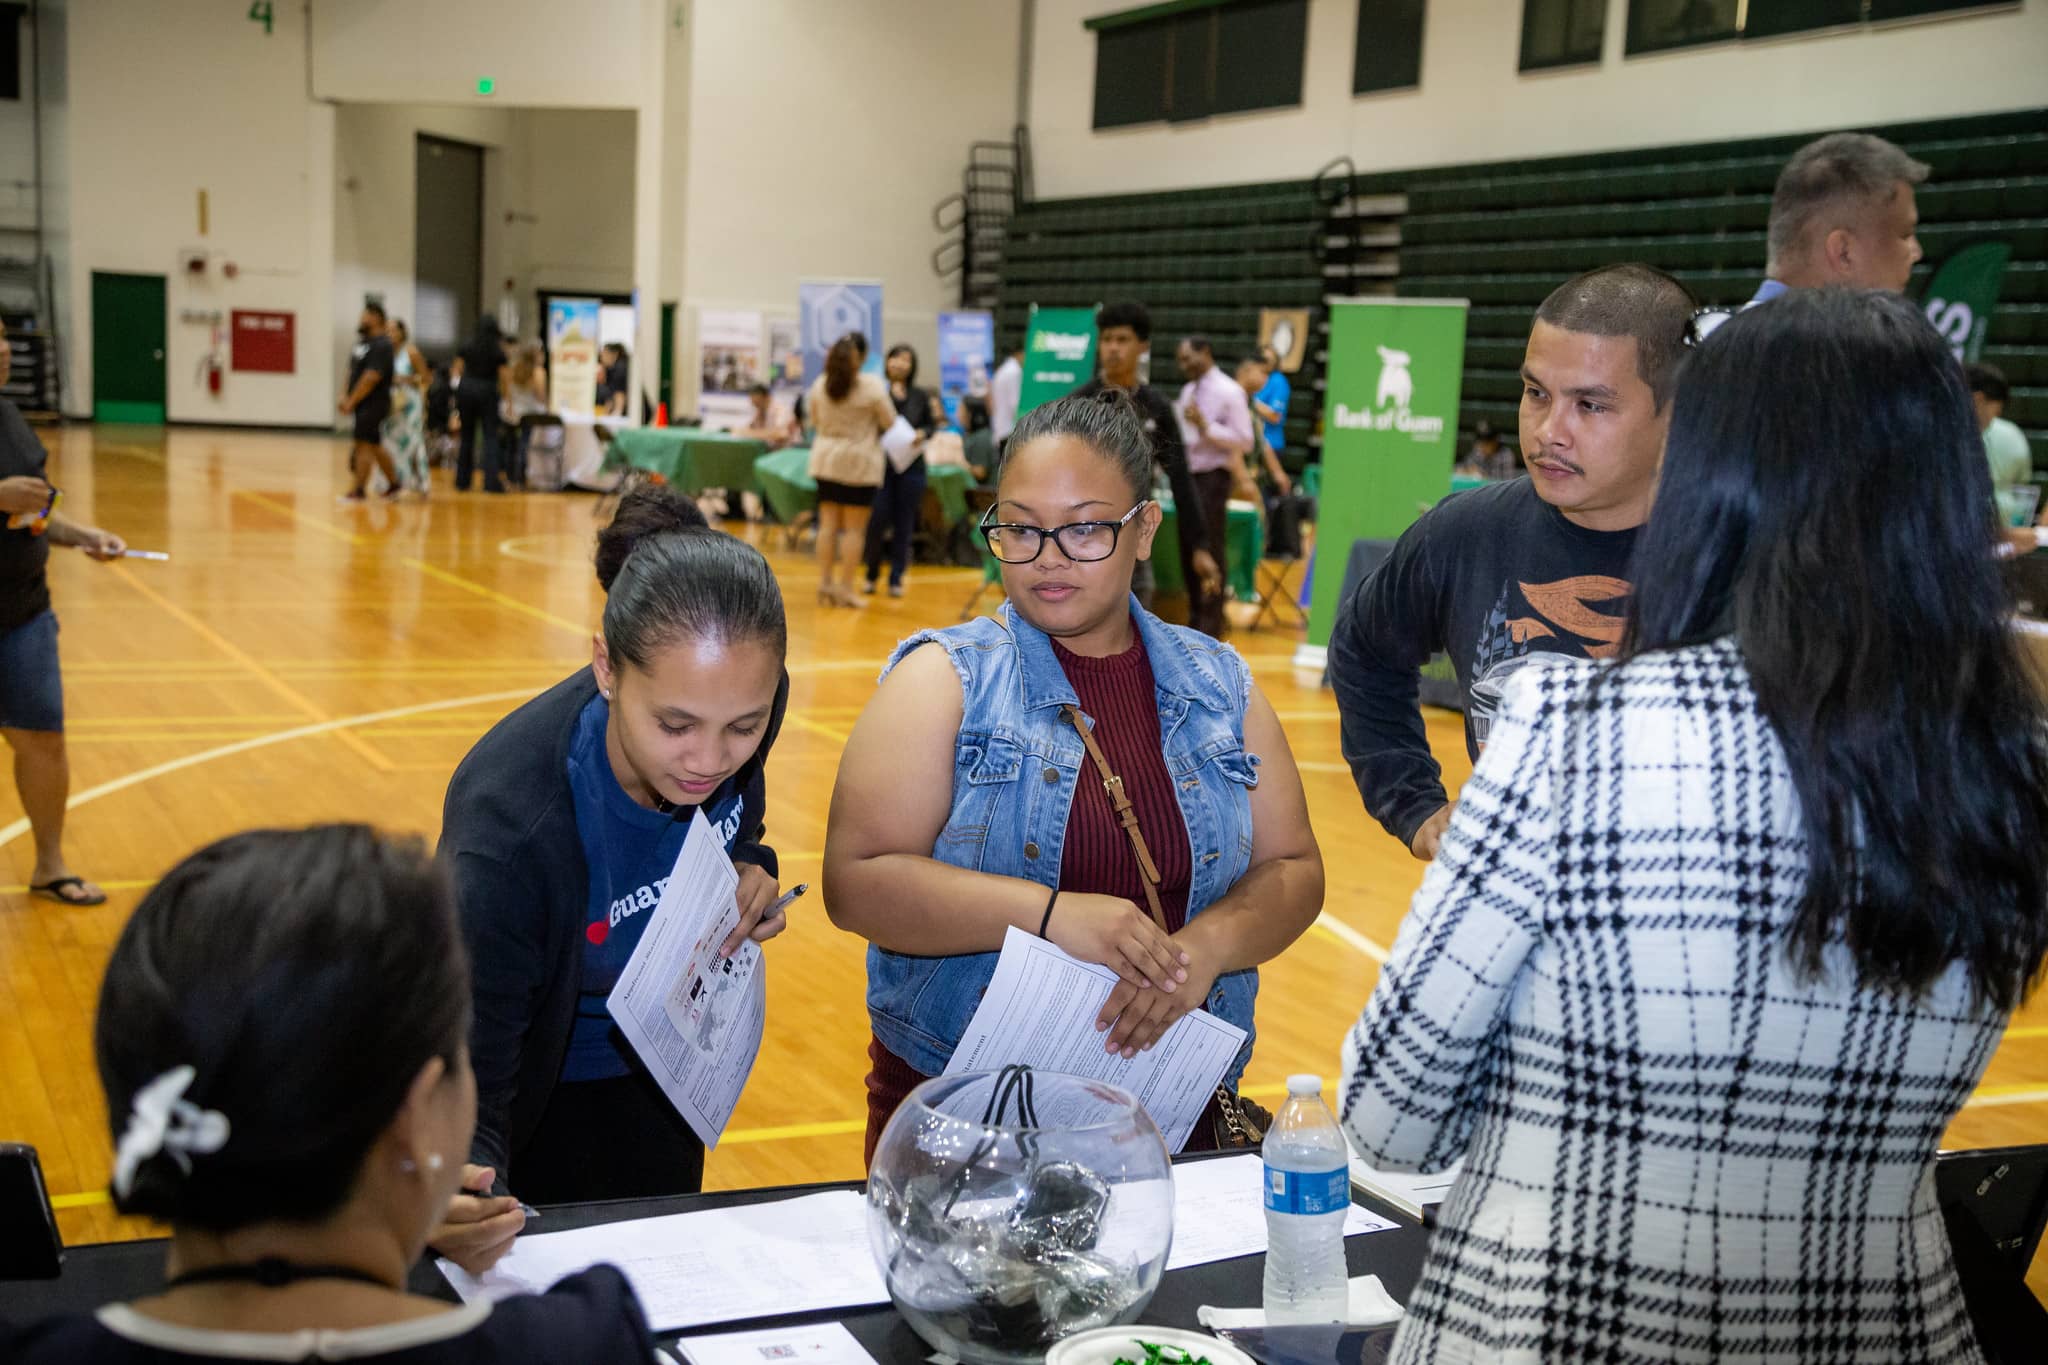 Job seekers check out an employer's table during a  job fair at the University of Guam Calvo Field House in 2019. Another job fair, scheduled for April 28, will have more than 50 employers participating.